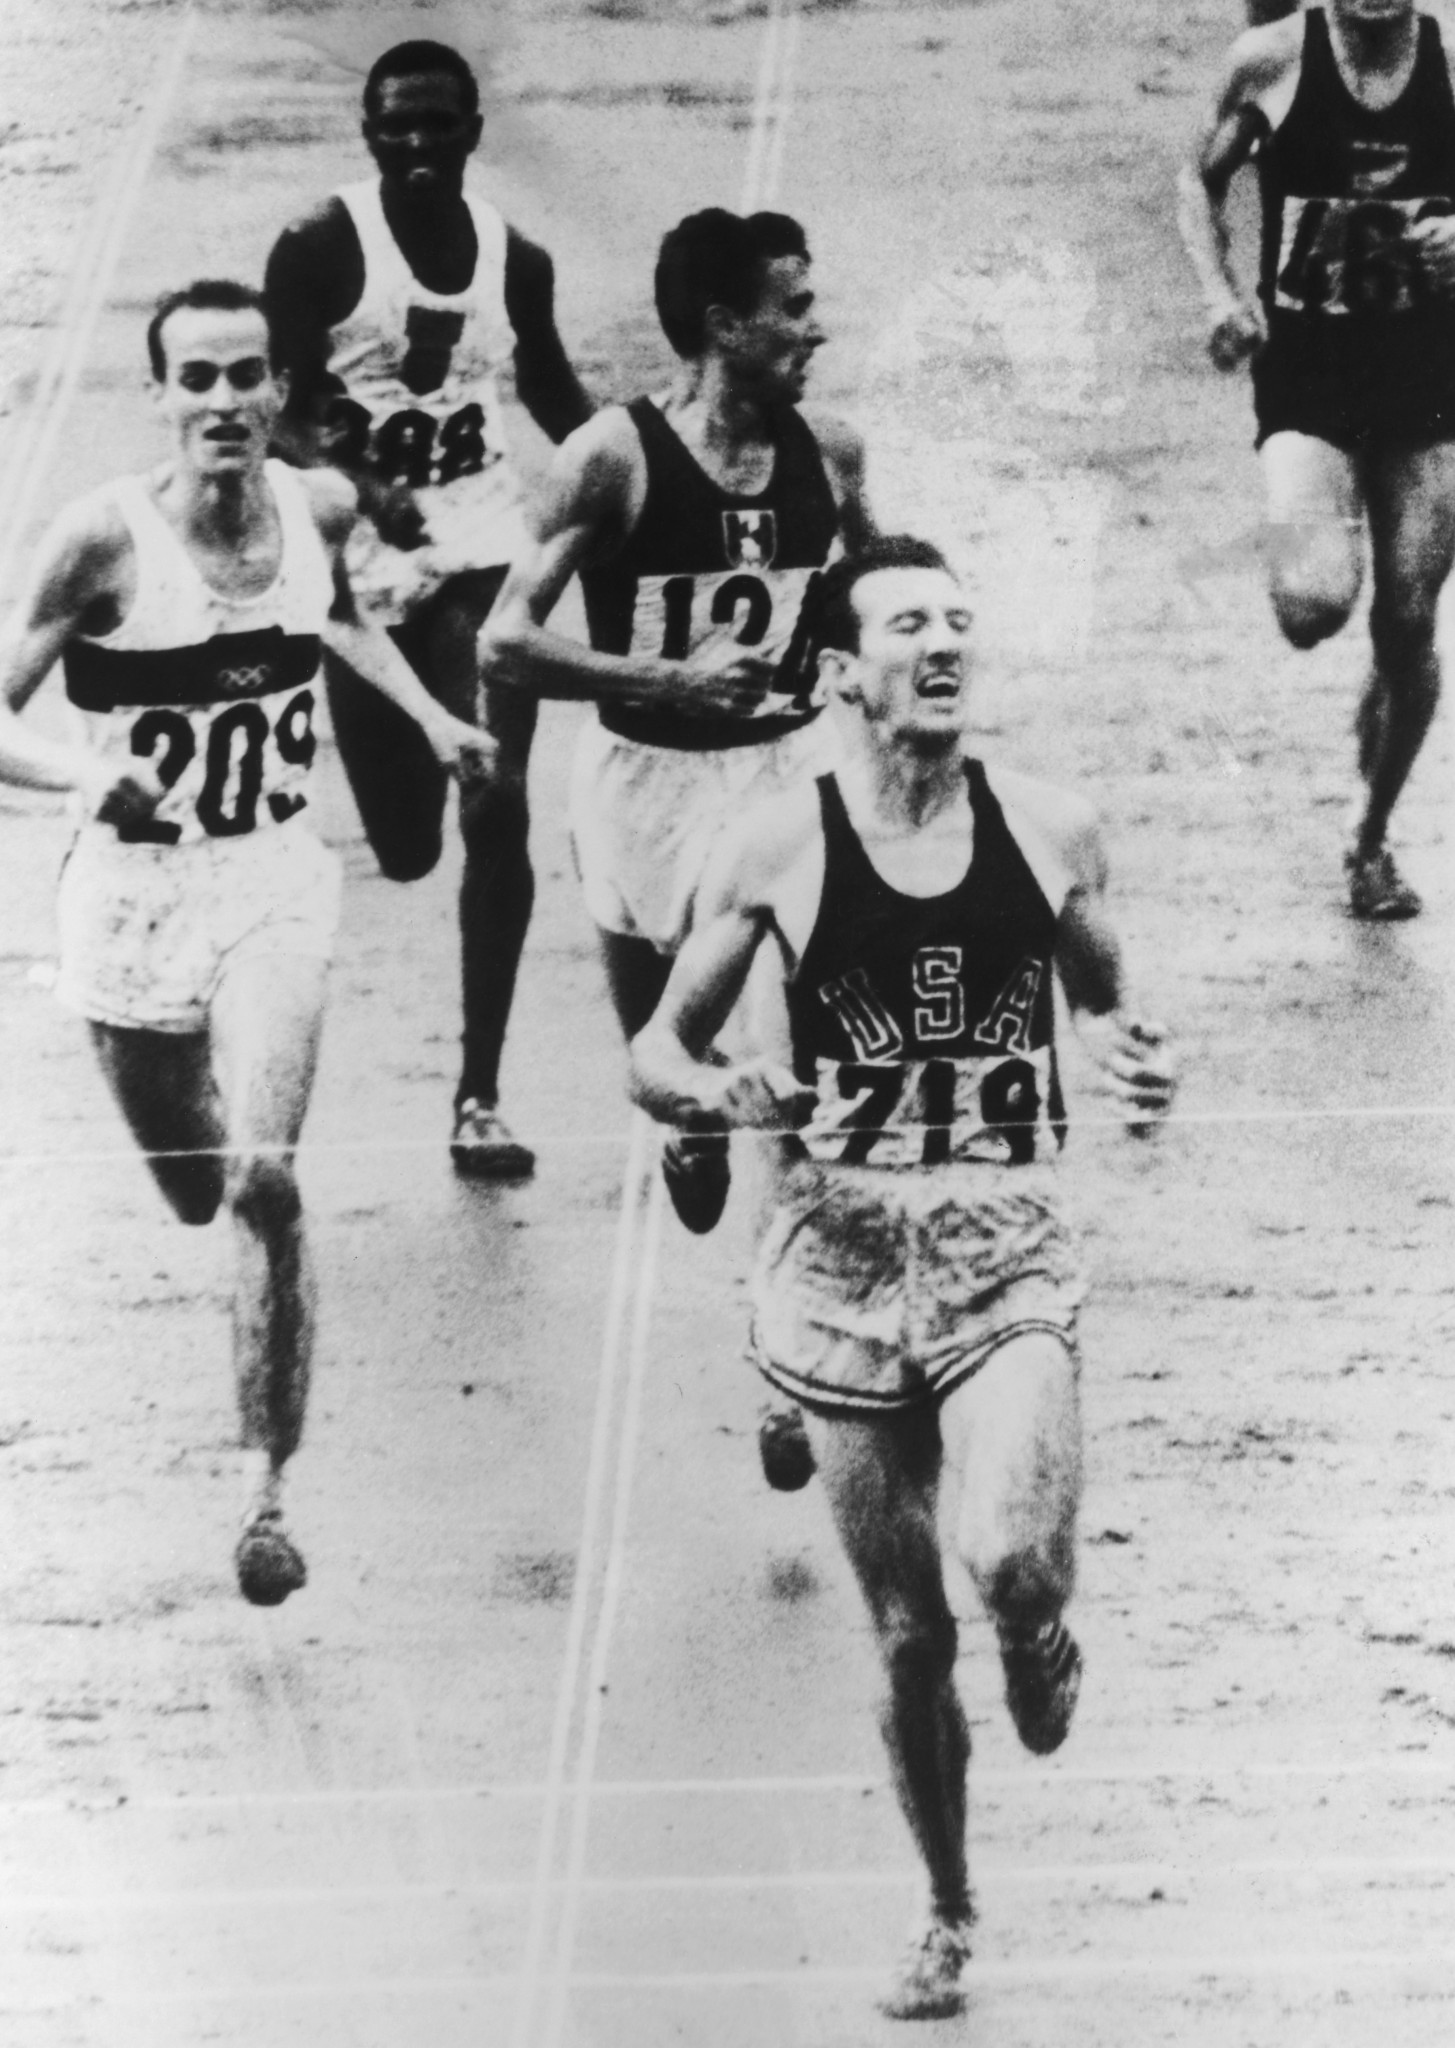 Bob Schul (719), who won the 5,000 metre race at the 1967 Tokyo Olympics had died aged 86. GETTY IMAGES